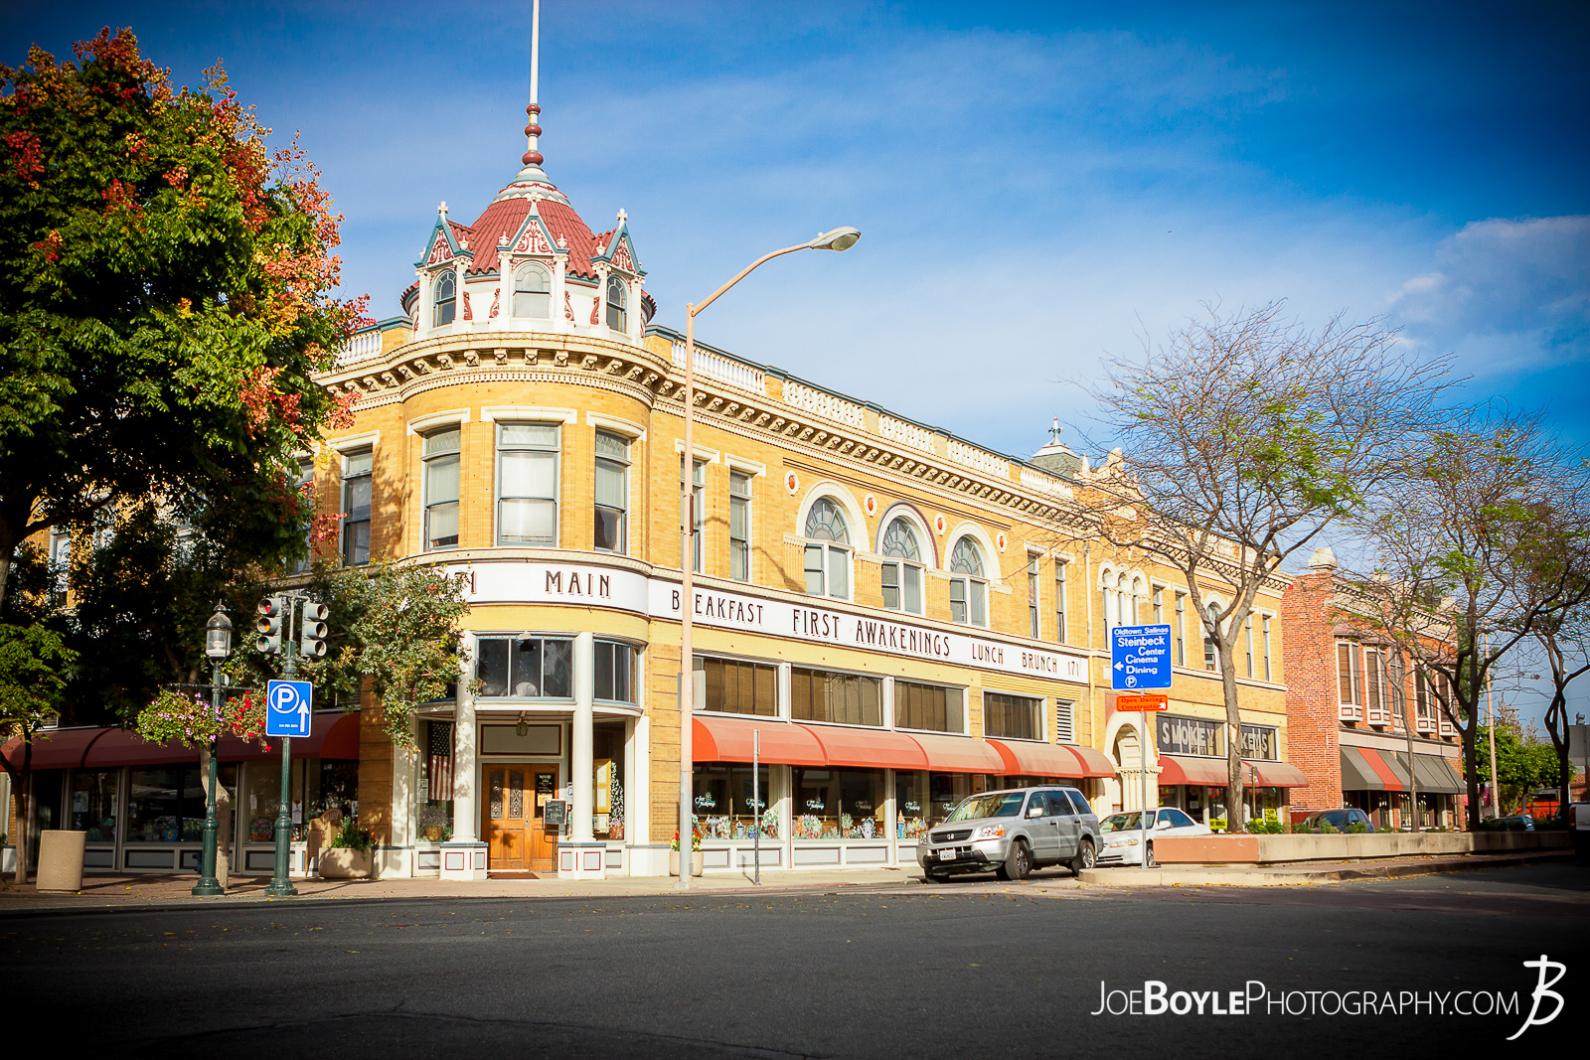 Here is a photo of Oldtown Salinas on 171 Main Street. I really loved the old time look and architecture. Come here and have breakfast!